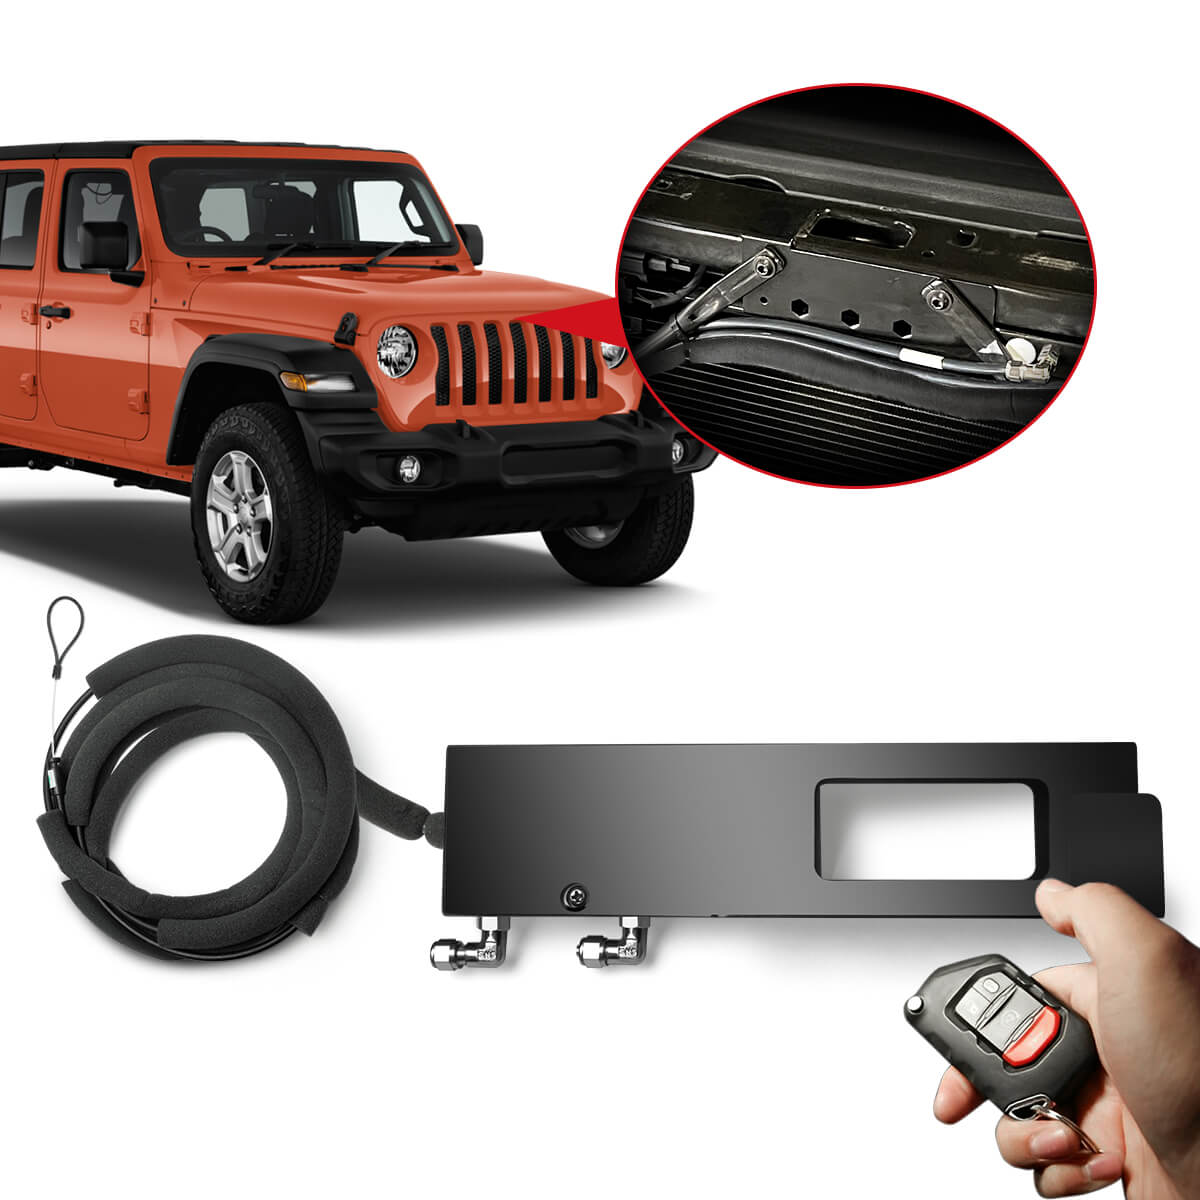 Lasfit Stealth Anti-Theft Hood Lock for 18-22 Jeep Wrangler JL and Gladiator JT